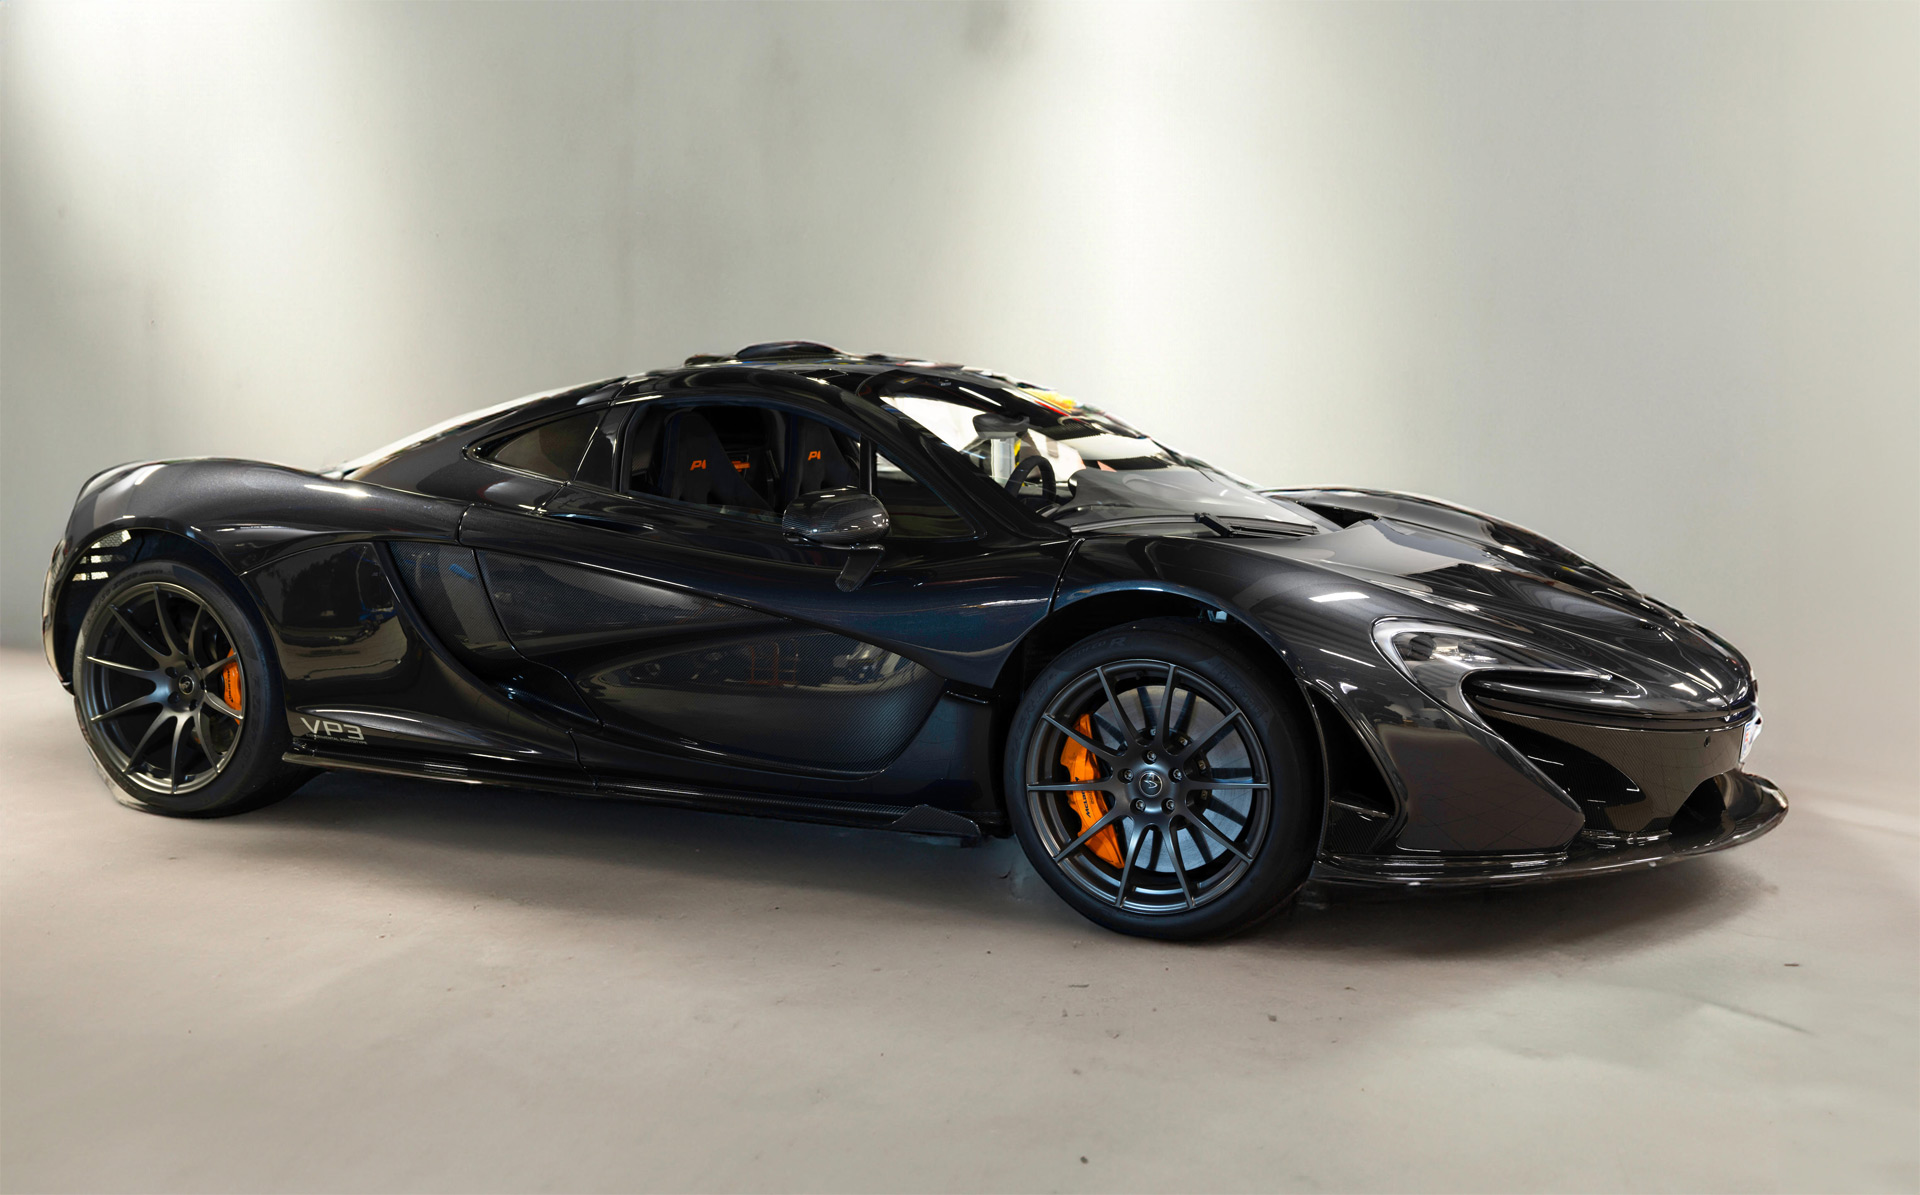 Purchase the McLaren P1 previously owned by double-F1 world champion Mika Häkkinen.